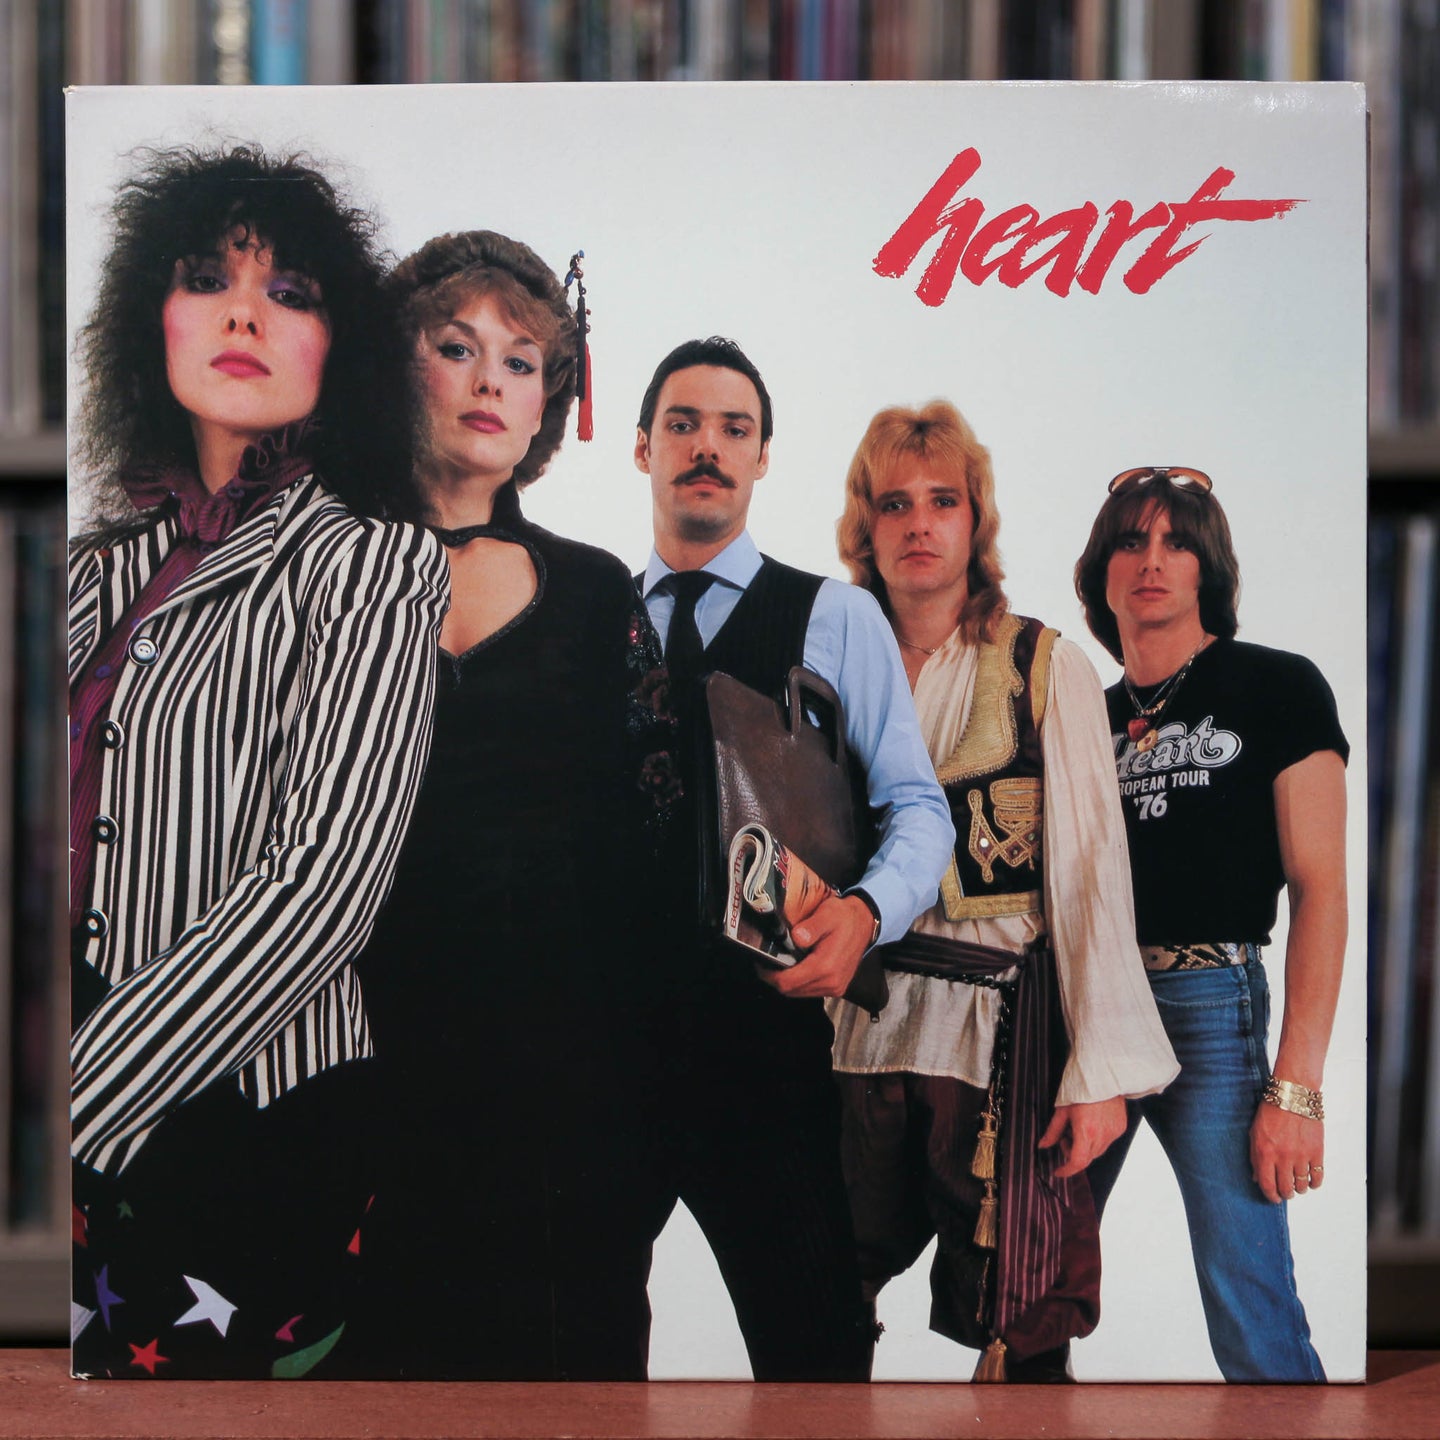 Heart - Greatest Hits / Live - 2LP - 1980 Epic, EX/VG+